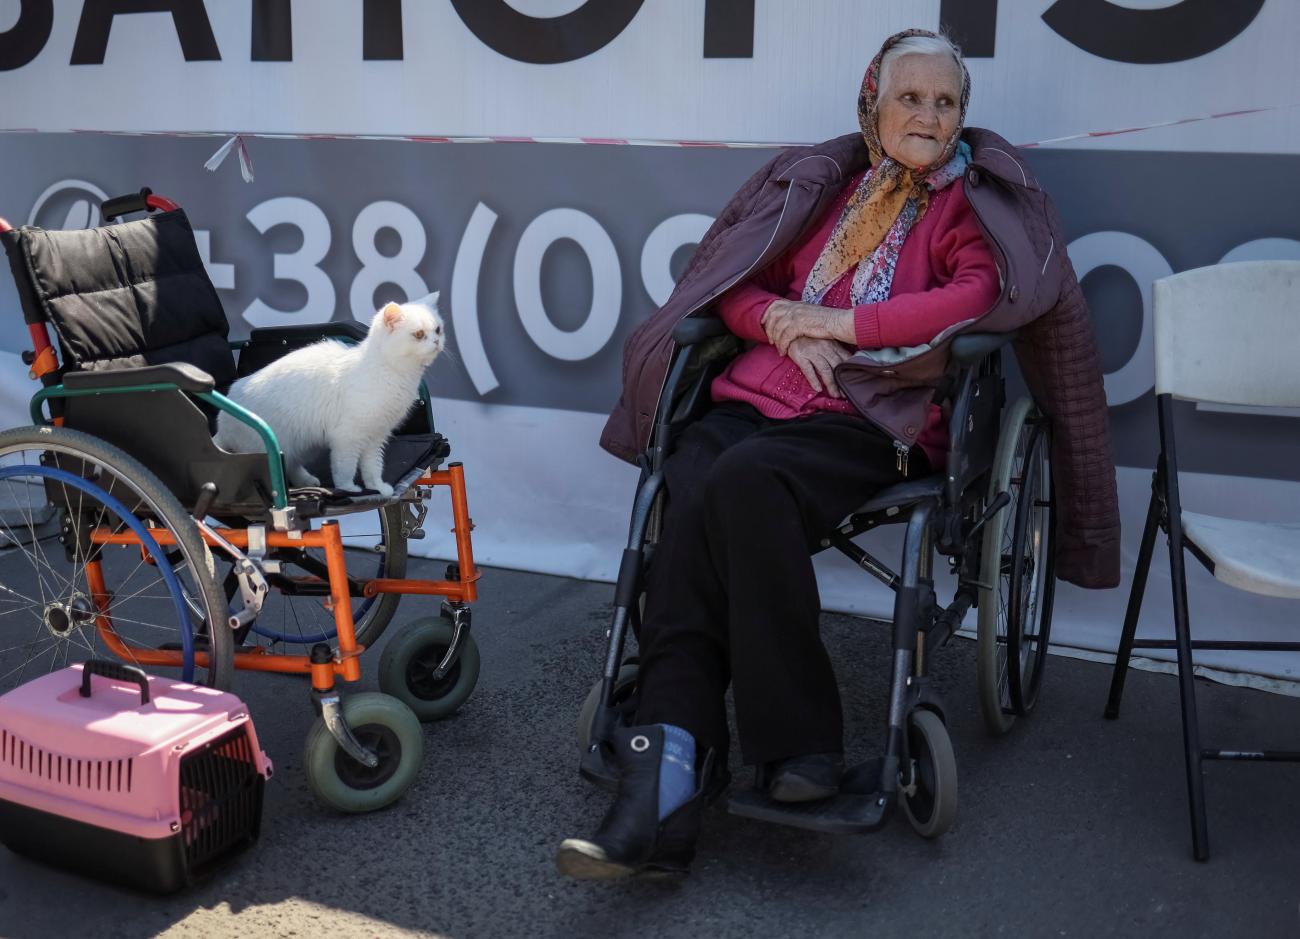 A Ukrainian refugee from Mariupol, age 81, and her cat at a registration and humanitarian aid center for internally displaced people, amid Russia's ongoing invasion of Ukraine.